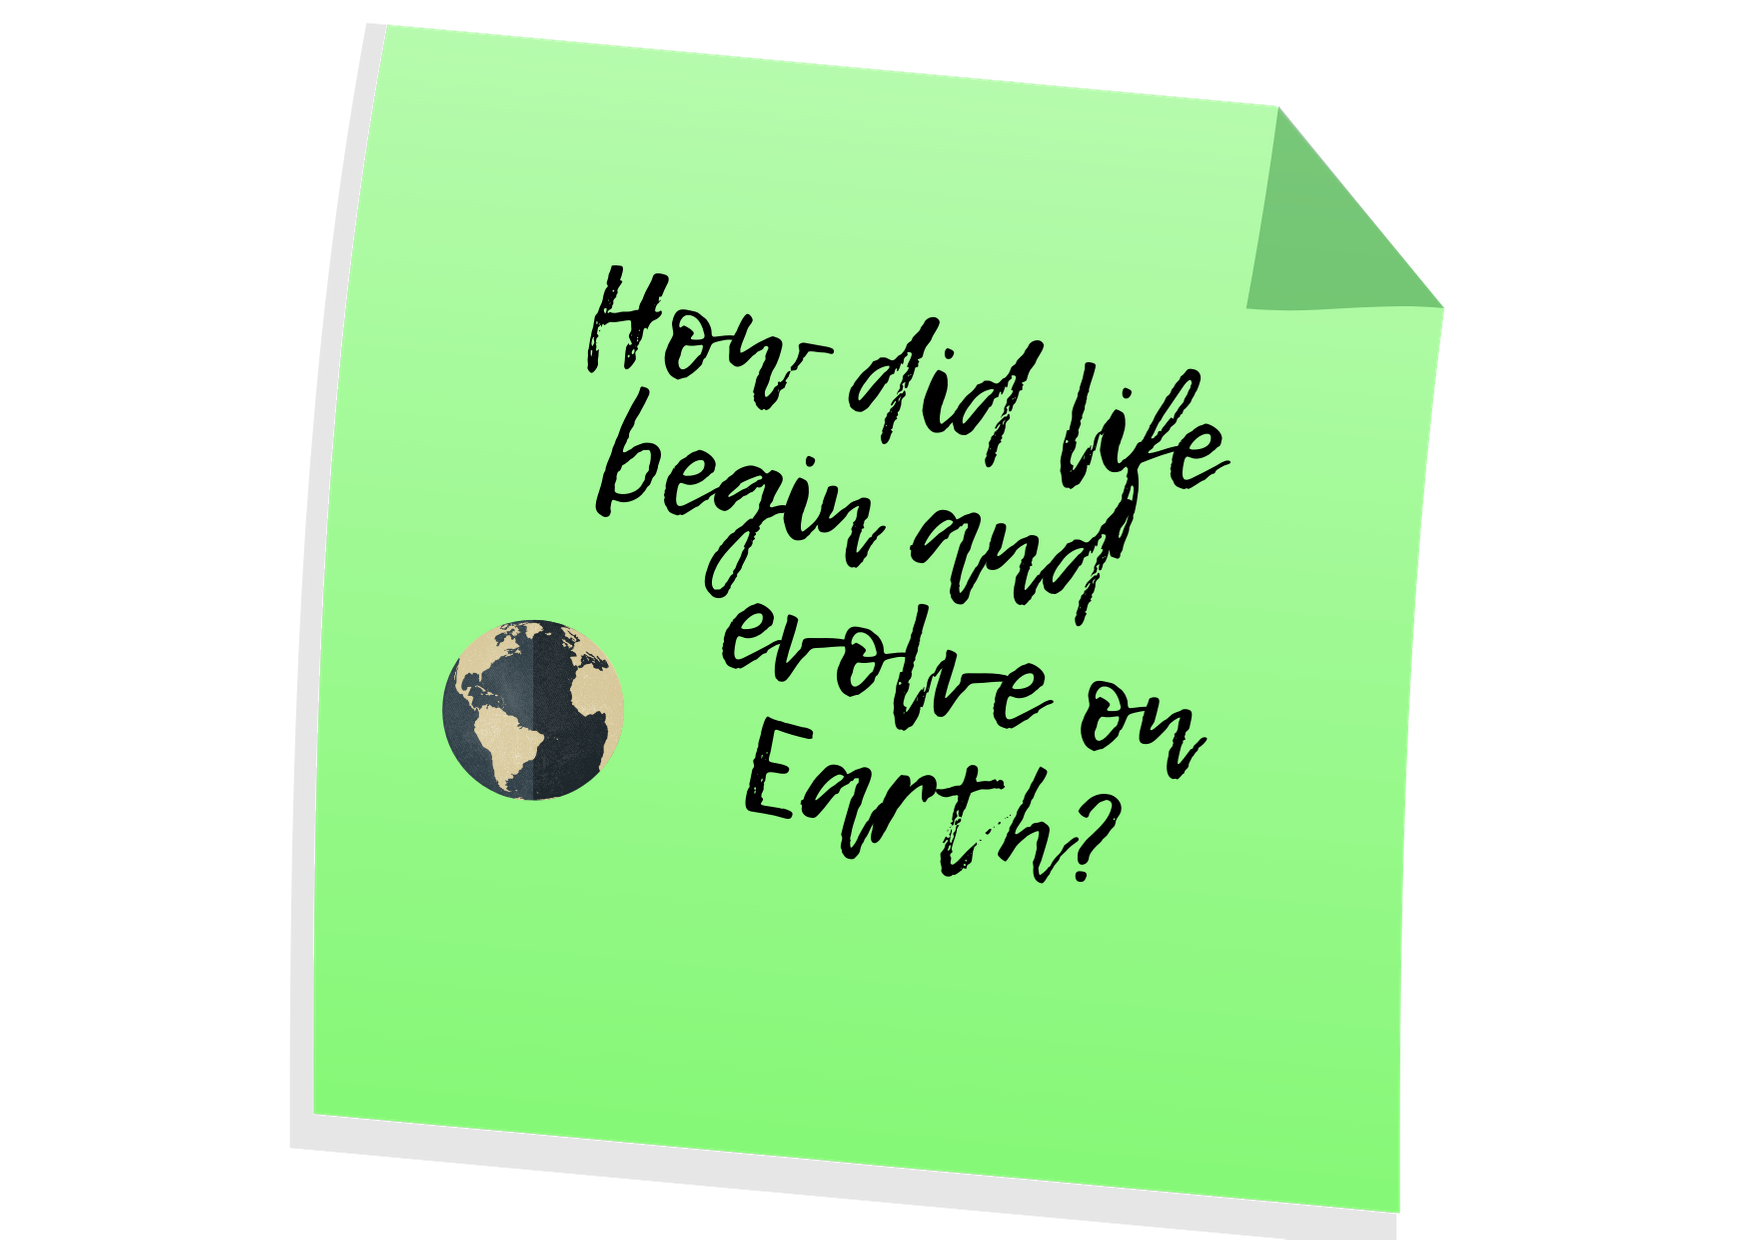 sketch of earth and words: how did life begin and evolve on earth?